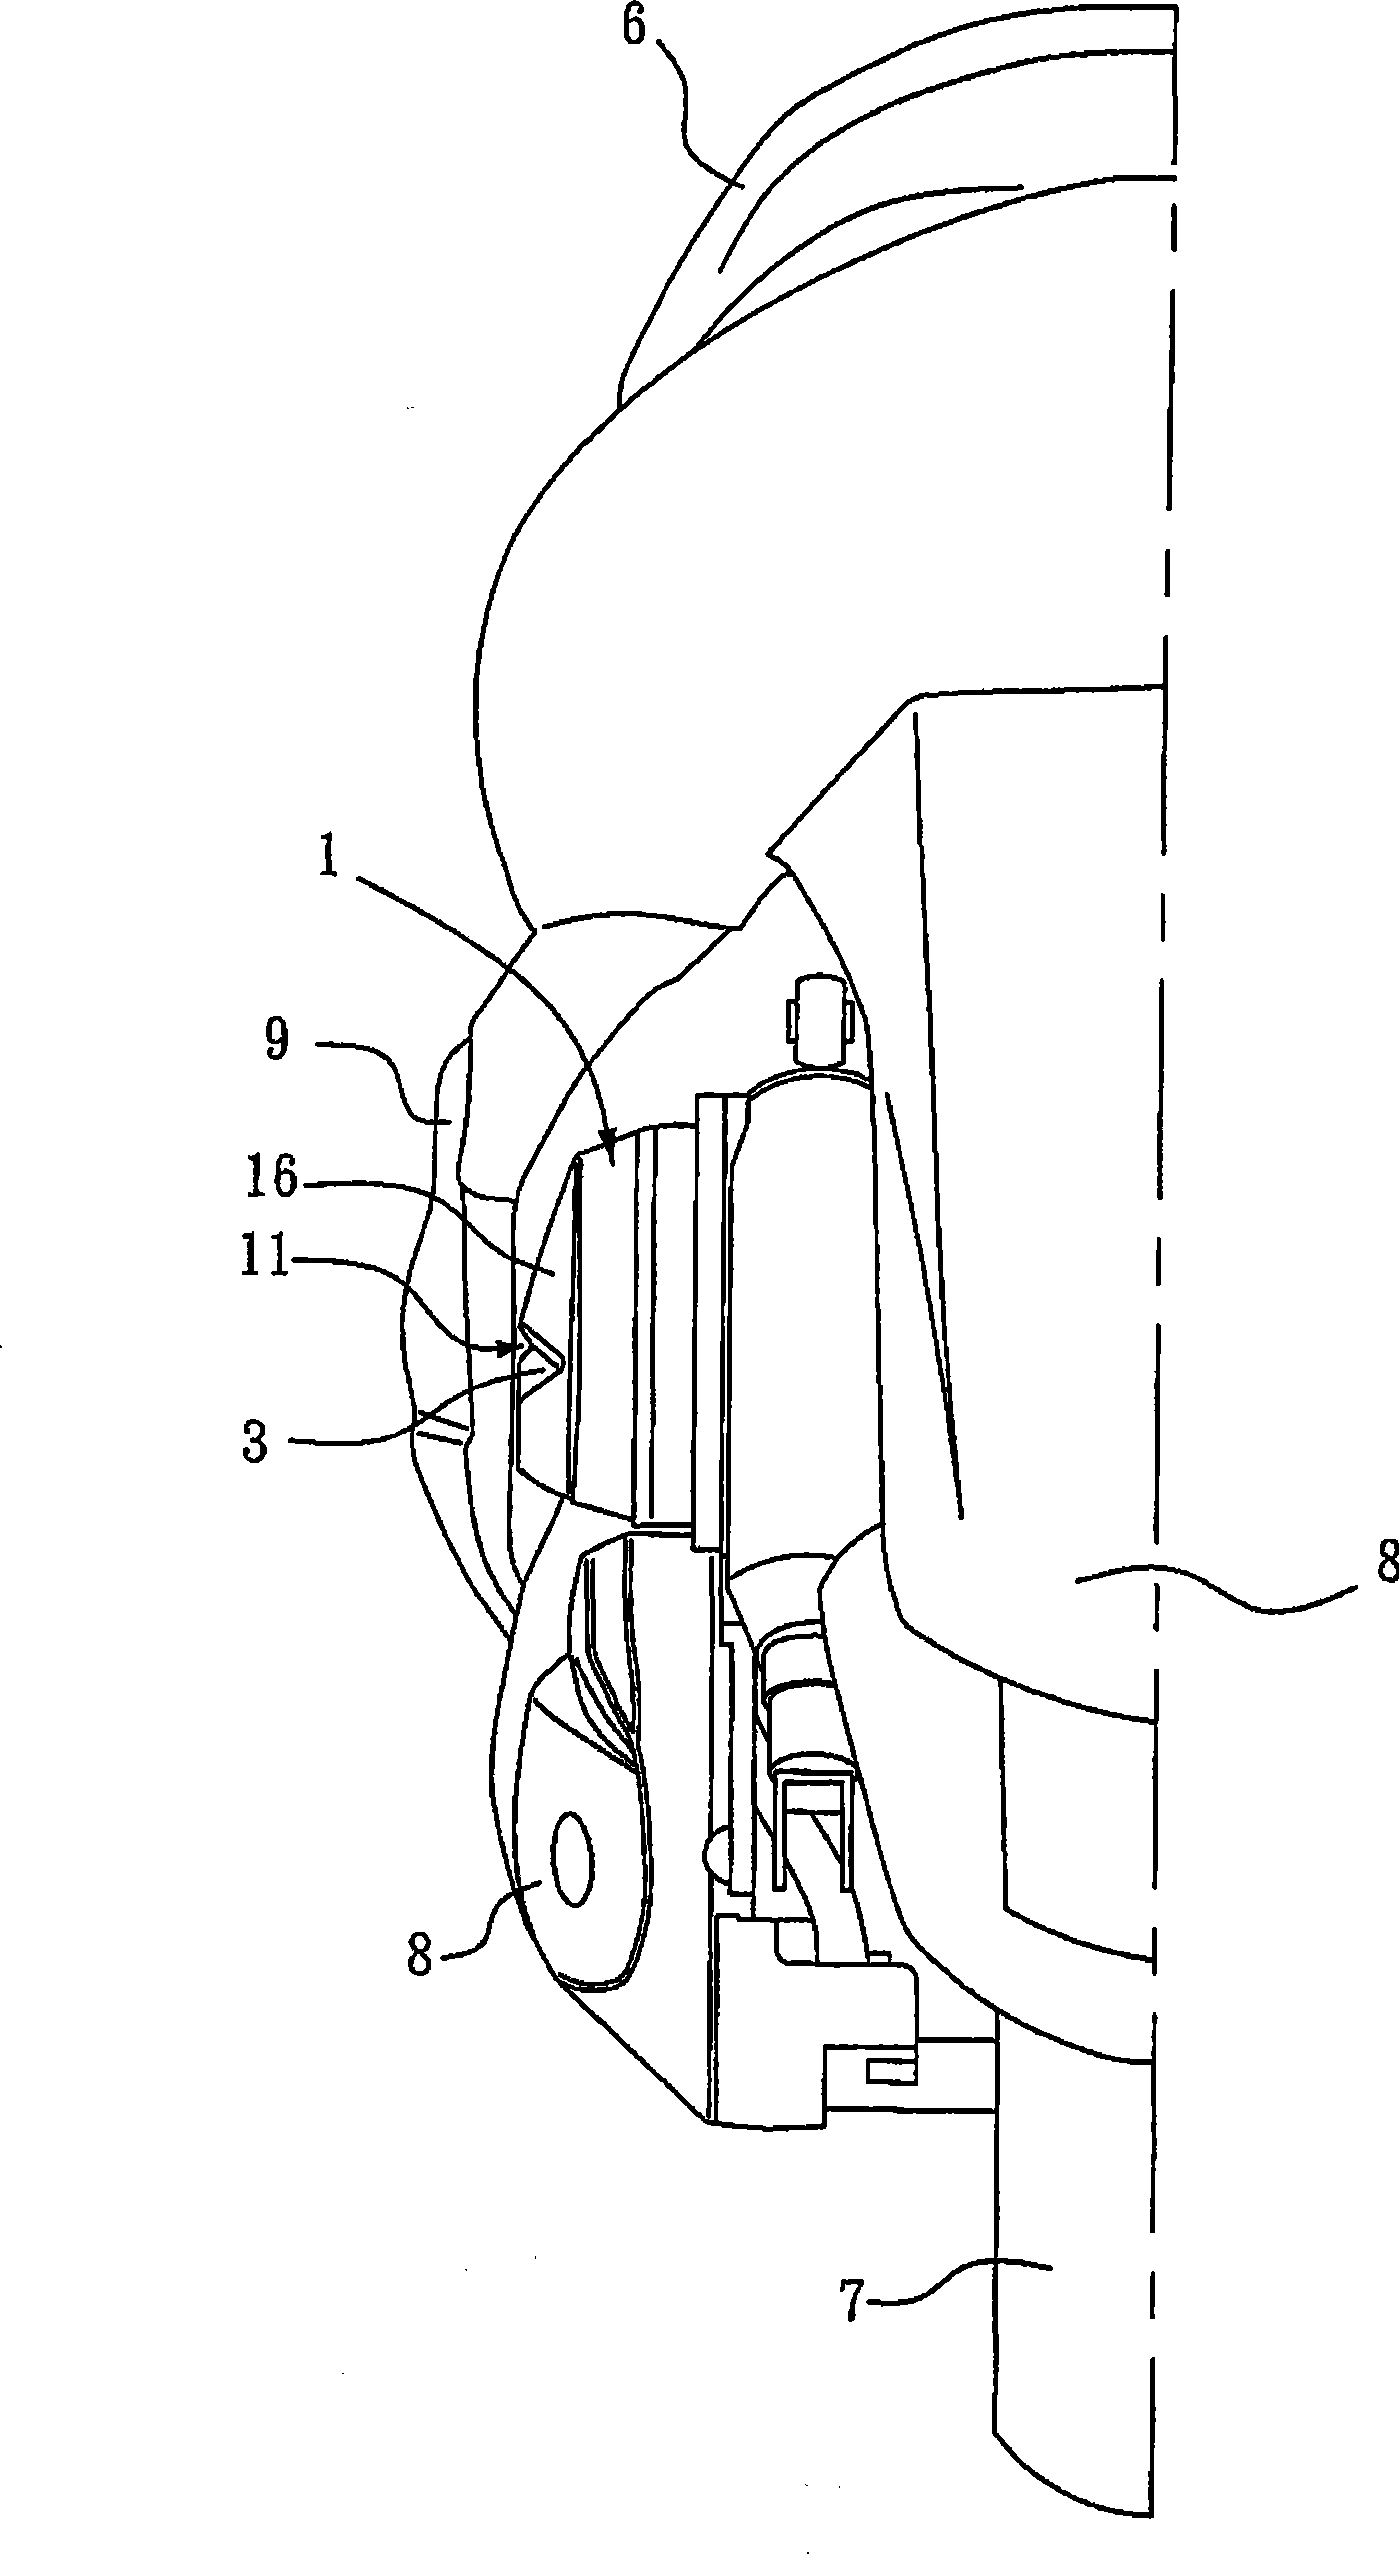 Drain structure of air cleaner for motorcycle